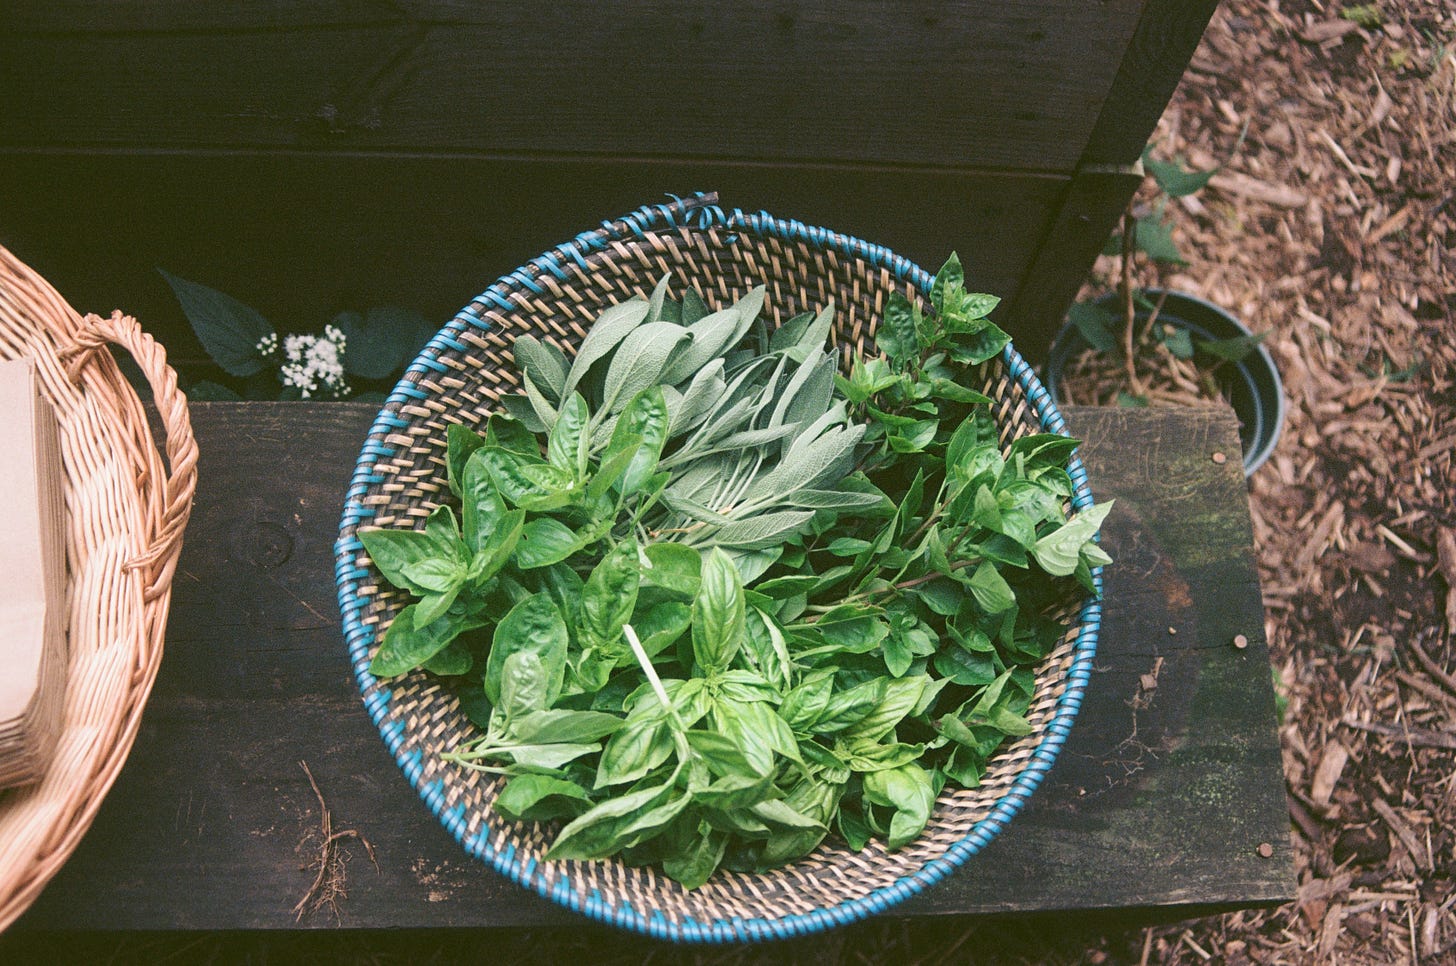 A harvest of herbs - basil and sage among them - are seen in a woven basket from above. They rest on a wooden bench. On the right side of the image are wood chips on the ground.